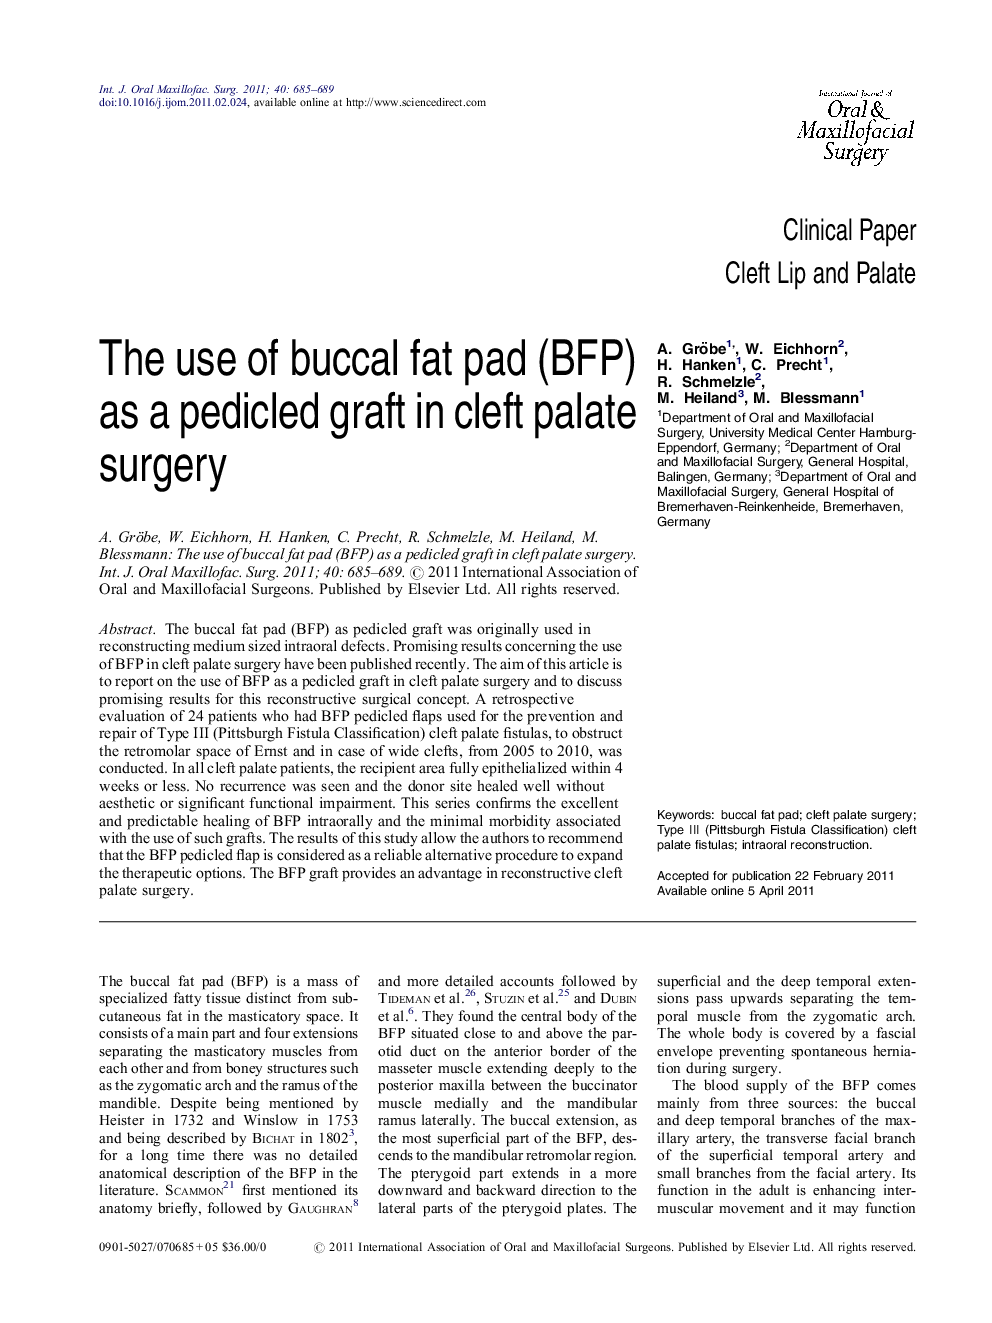 The use of buccal fat pad (BFP) as a pedicled graft in cleft palate surgery